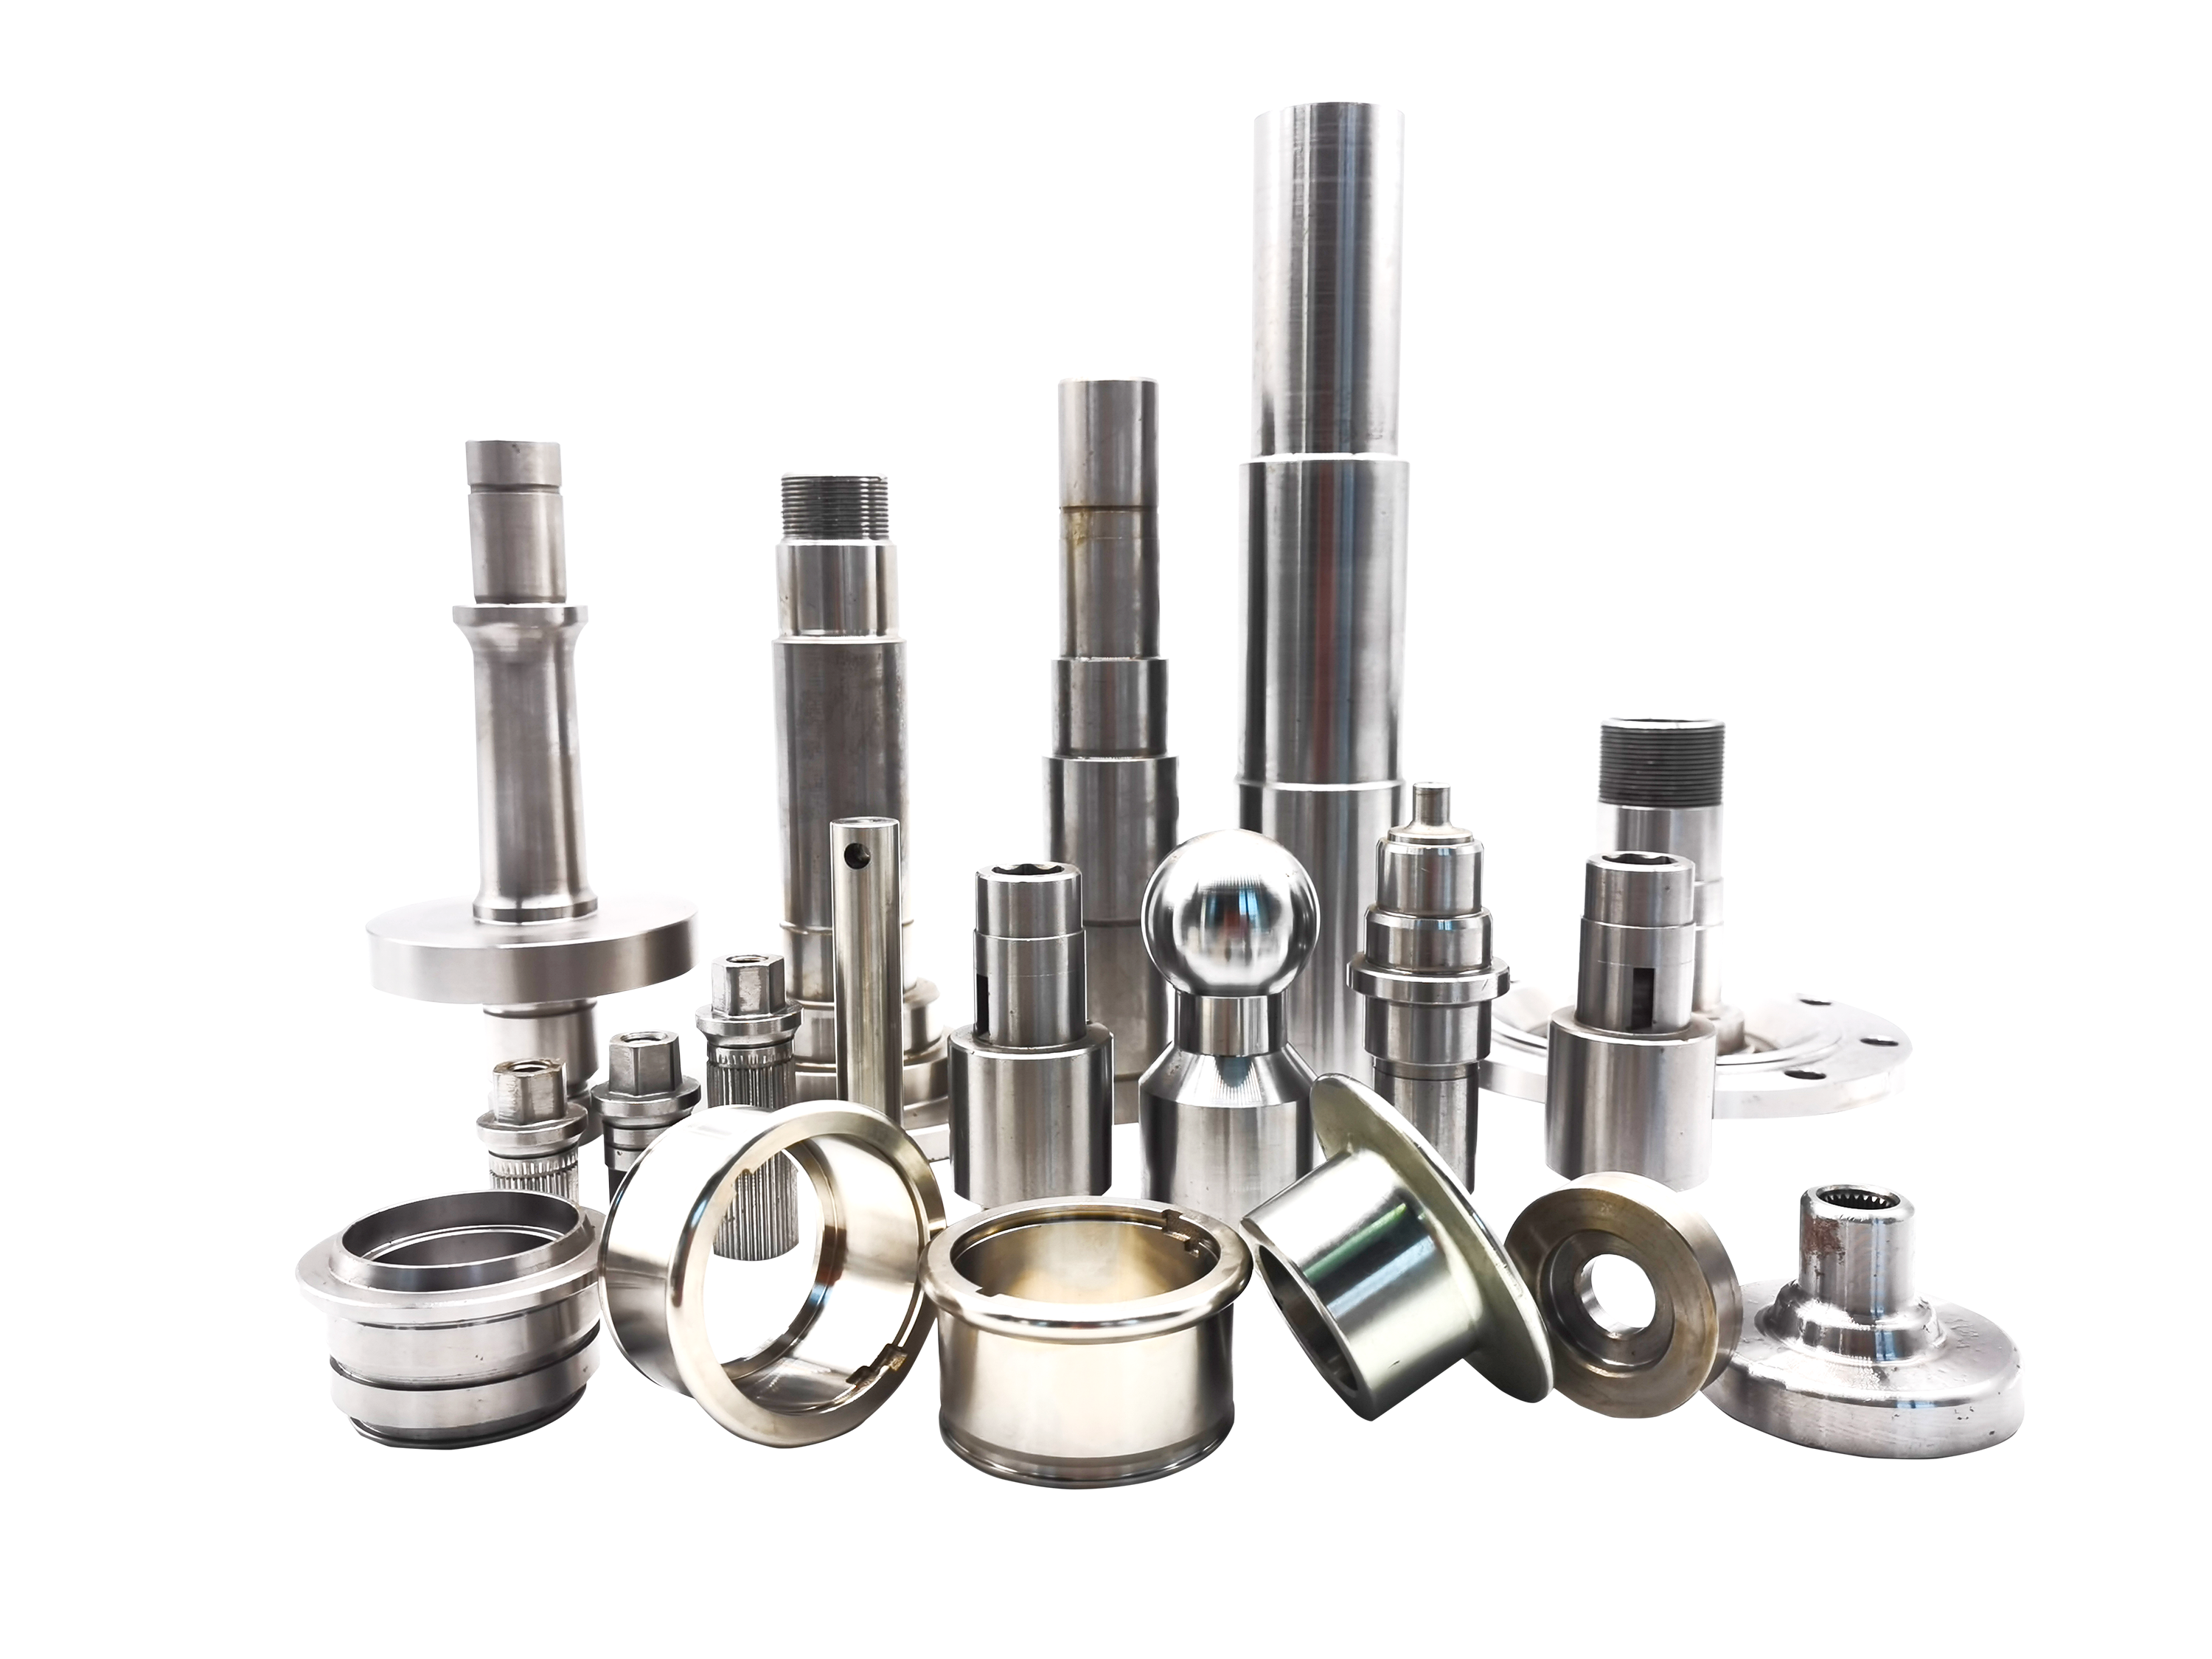 CNC turning part precision machining turned parts